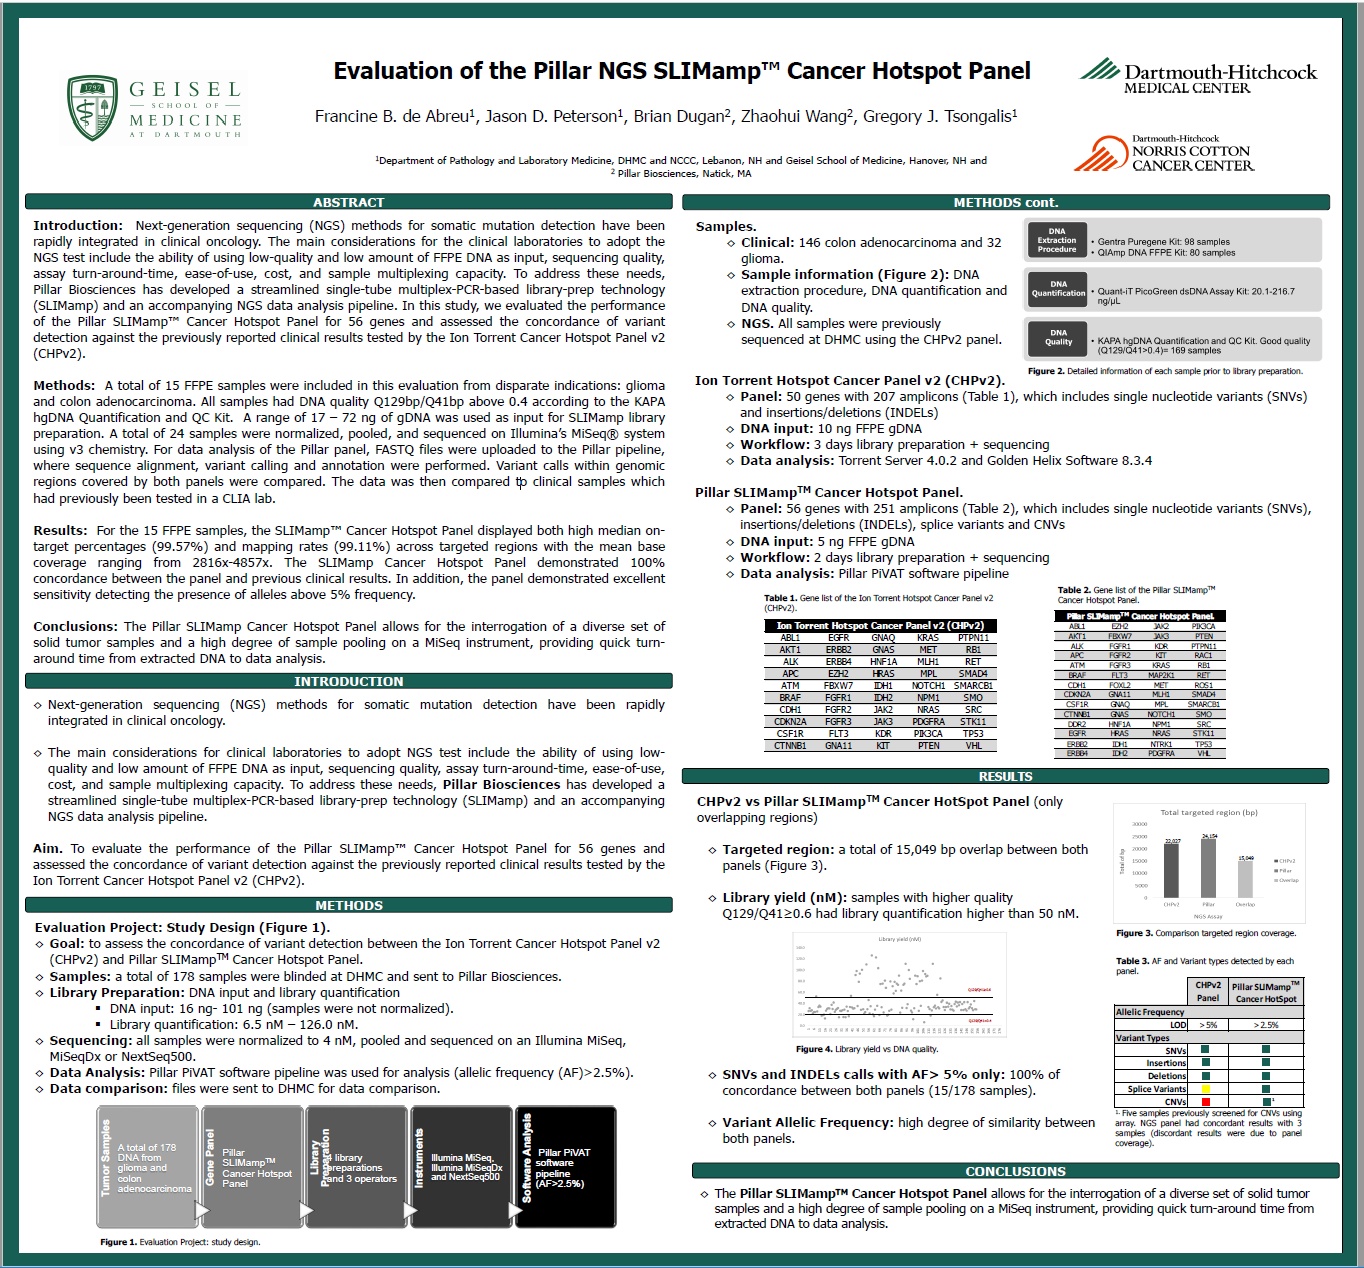 Screenshot of Evaluation of the Pillar NGS SLIMamp Cancer Hotspot Panel poster